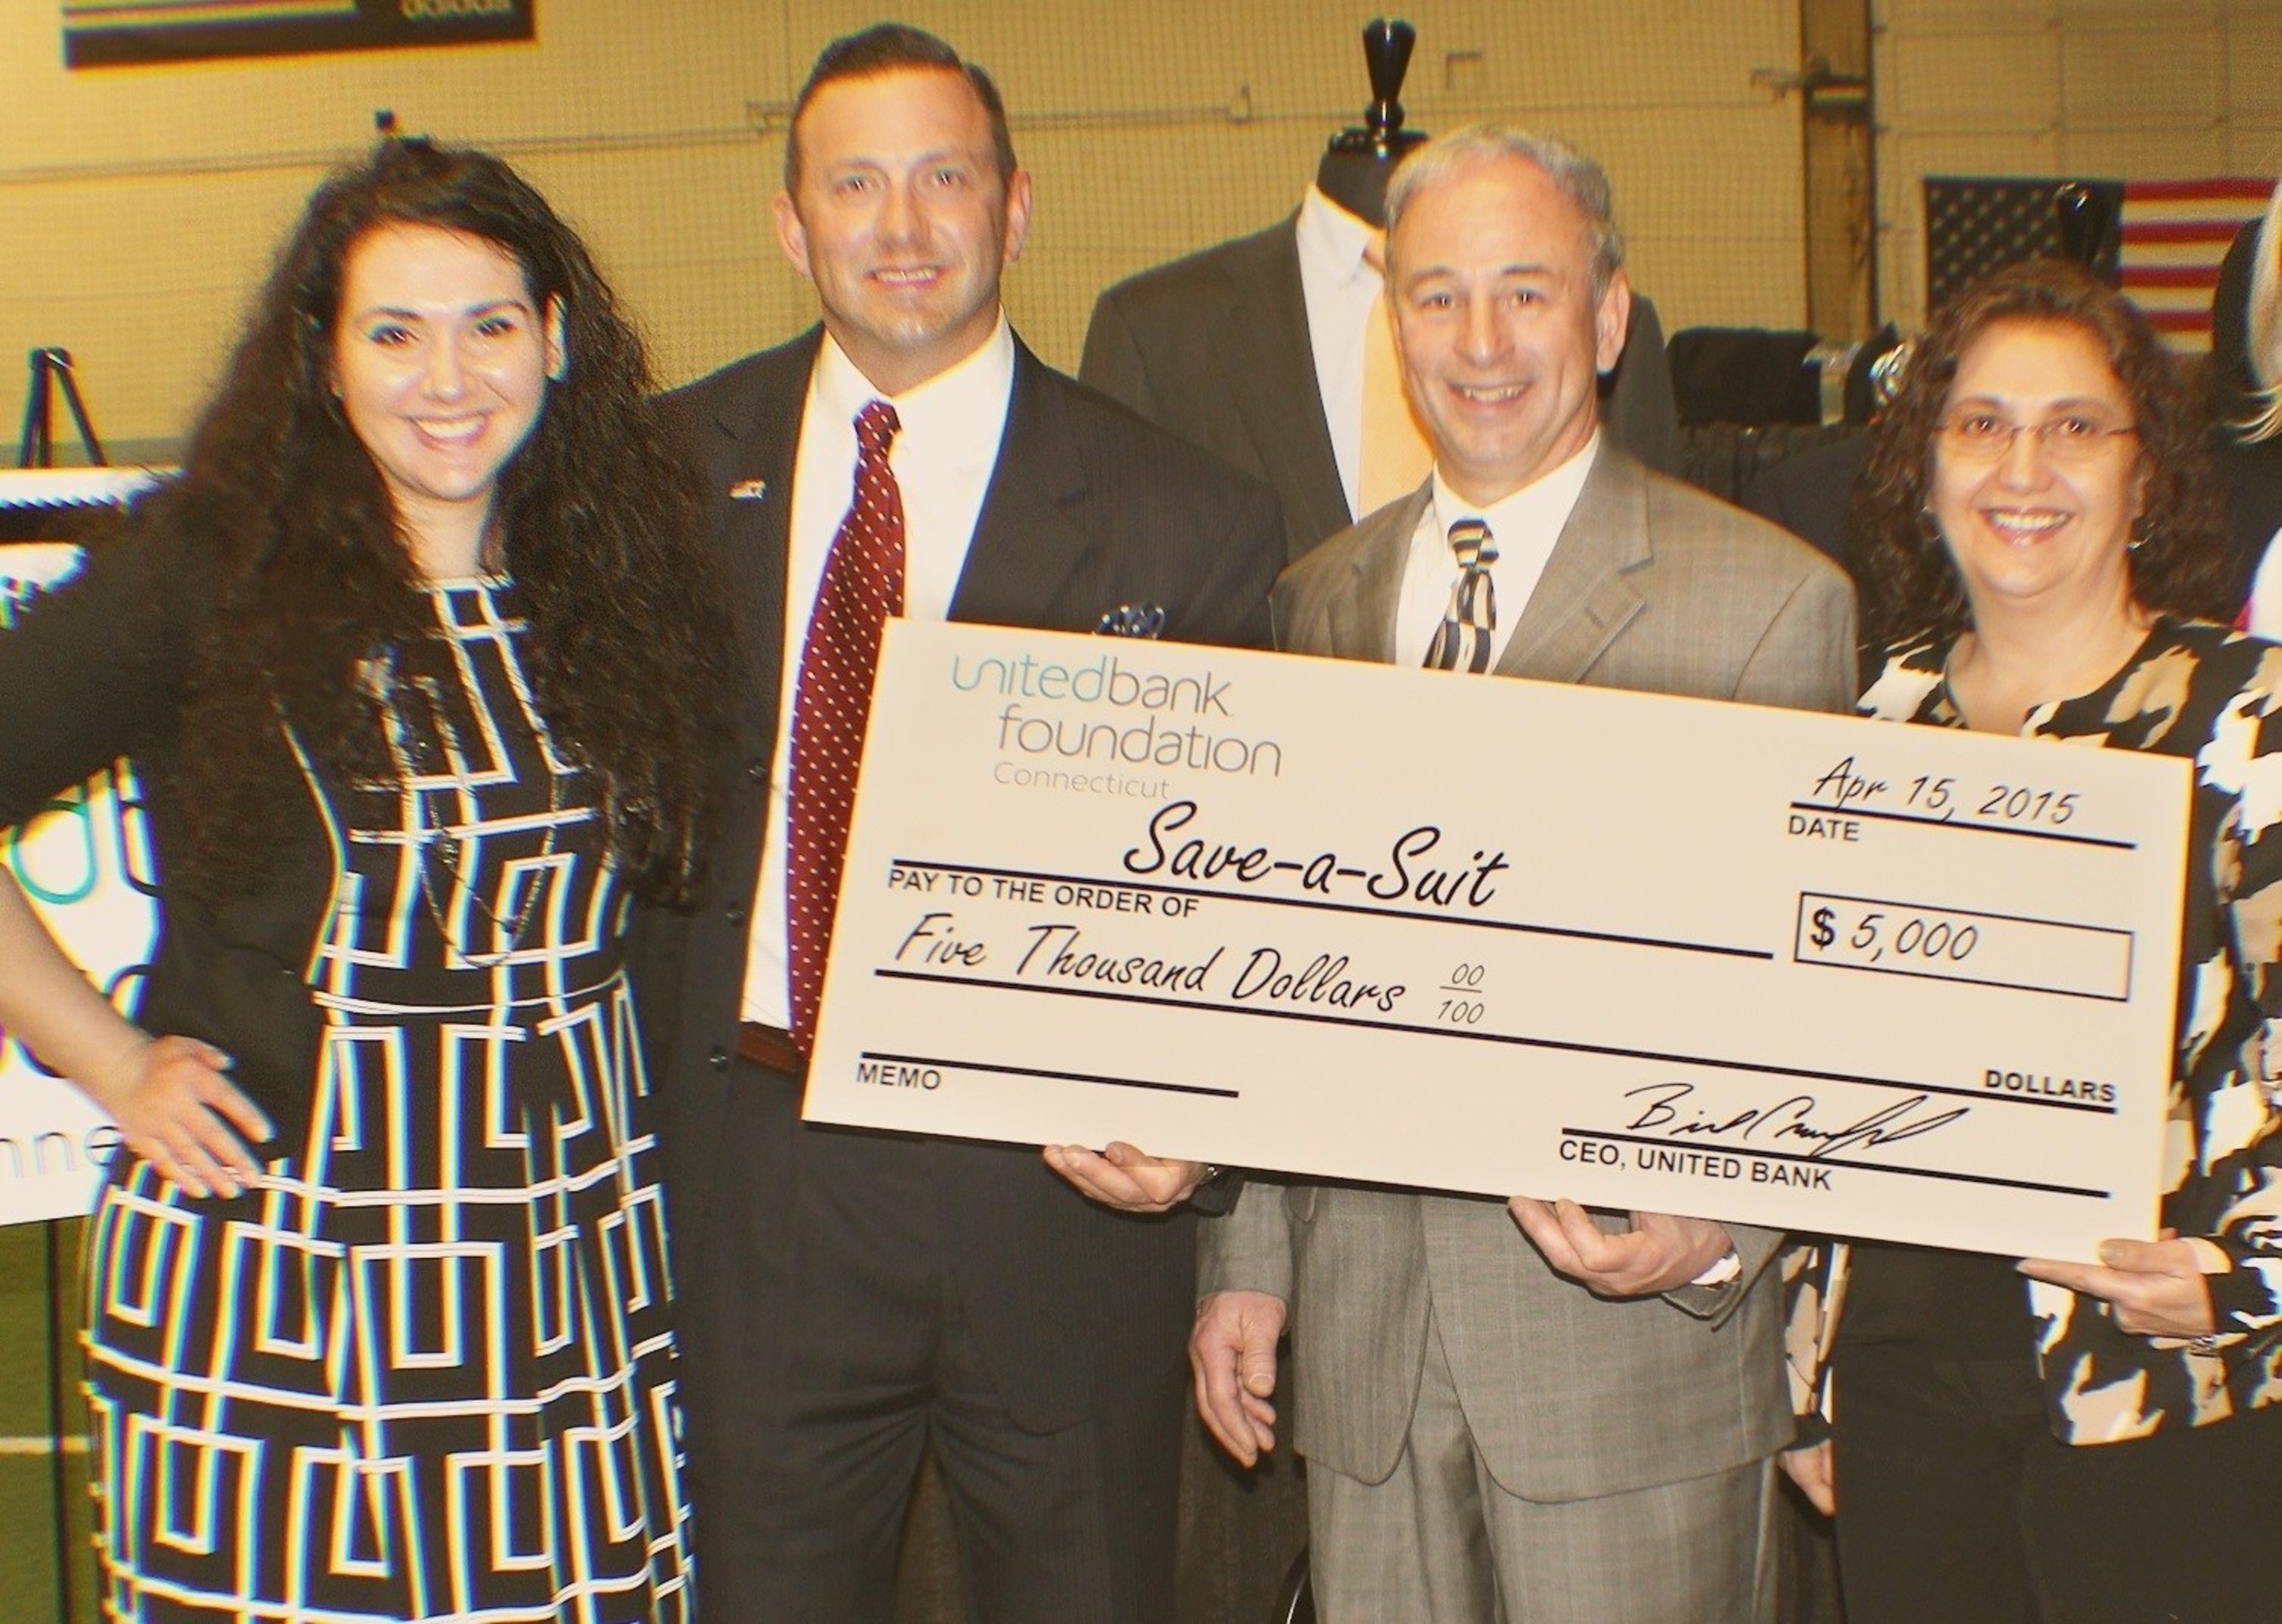 Pictured Left to Right are: Jessica Ewud, Executive Director, Save-A-Suit and Scott Sokolowski, President & Founder, Save-A-Suit accepting United Bank Foundation Connecticut's $5,000 donation from Bill Earley, Relationship Manager at United's Hamden, Conn. office and Dolores Bitz, Vice President and Cash Management Officer at United.